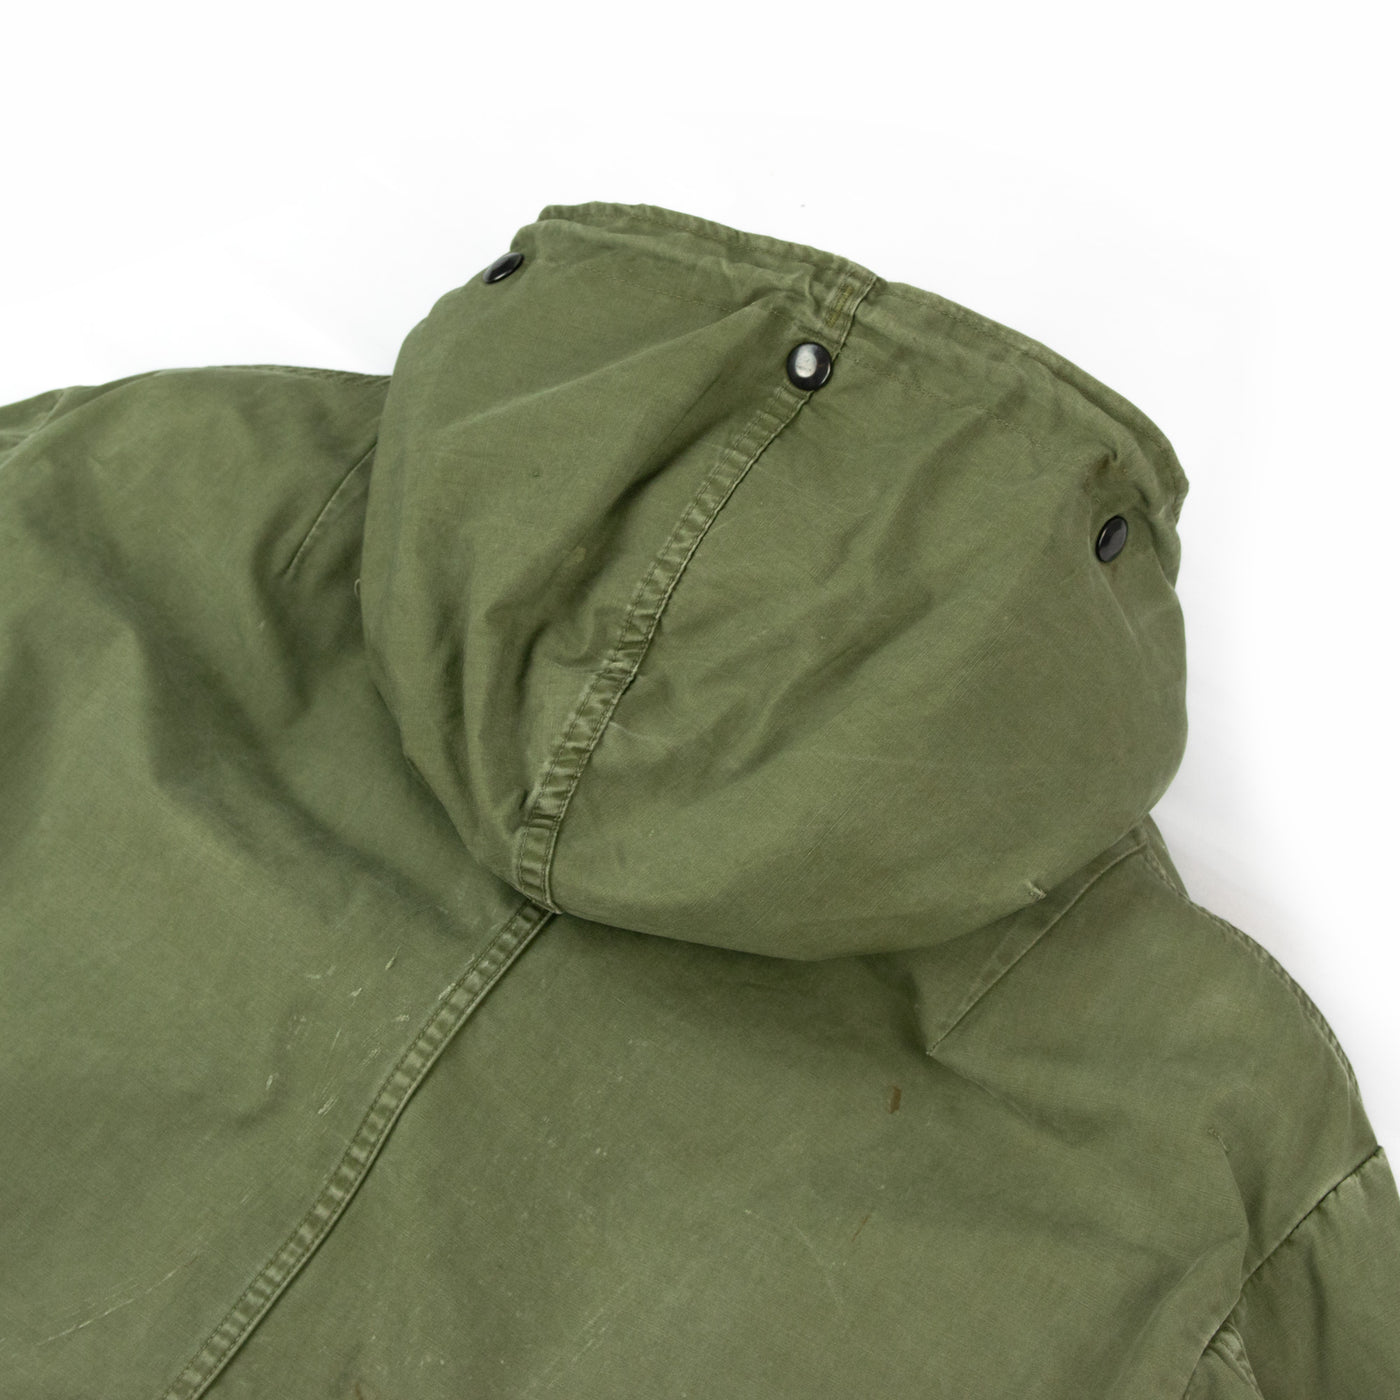 Vintage 1950s US Army Air Force M-47 Military Parka with Detachable Pile Liner - M Hood